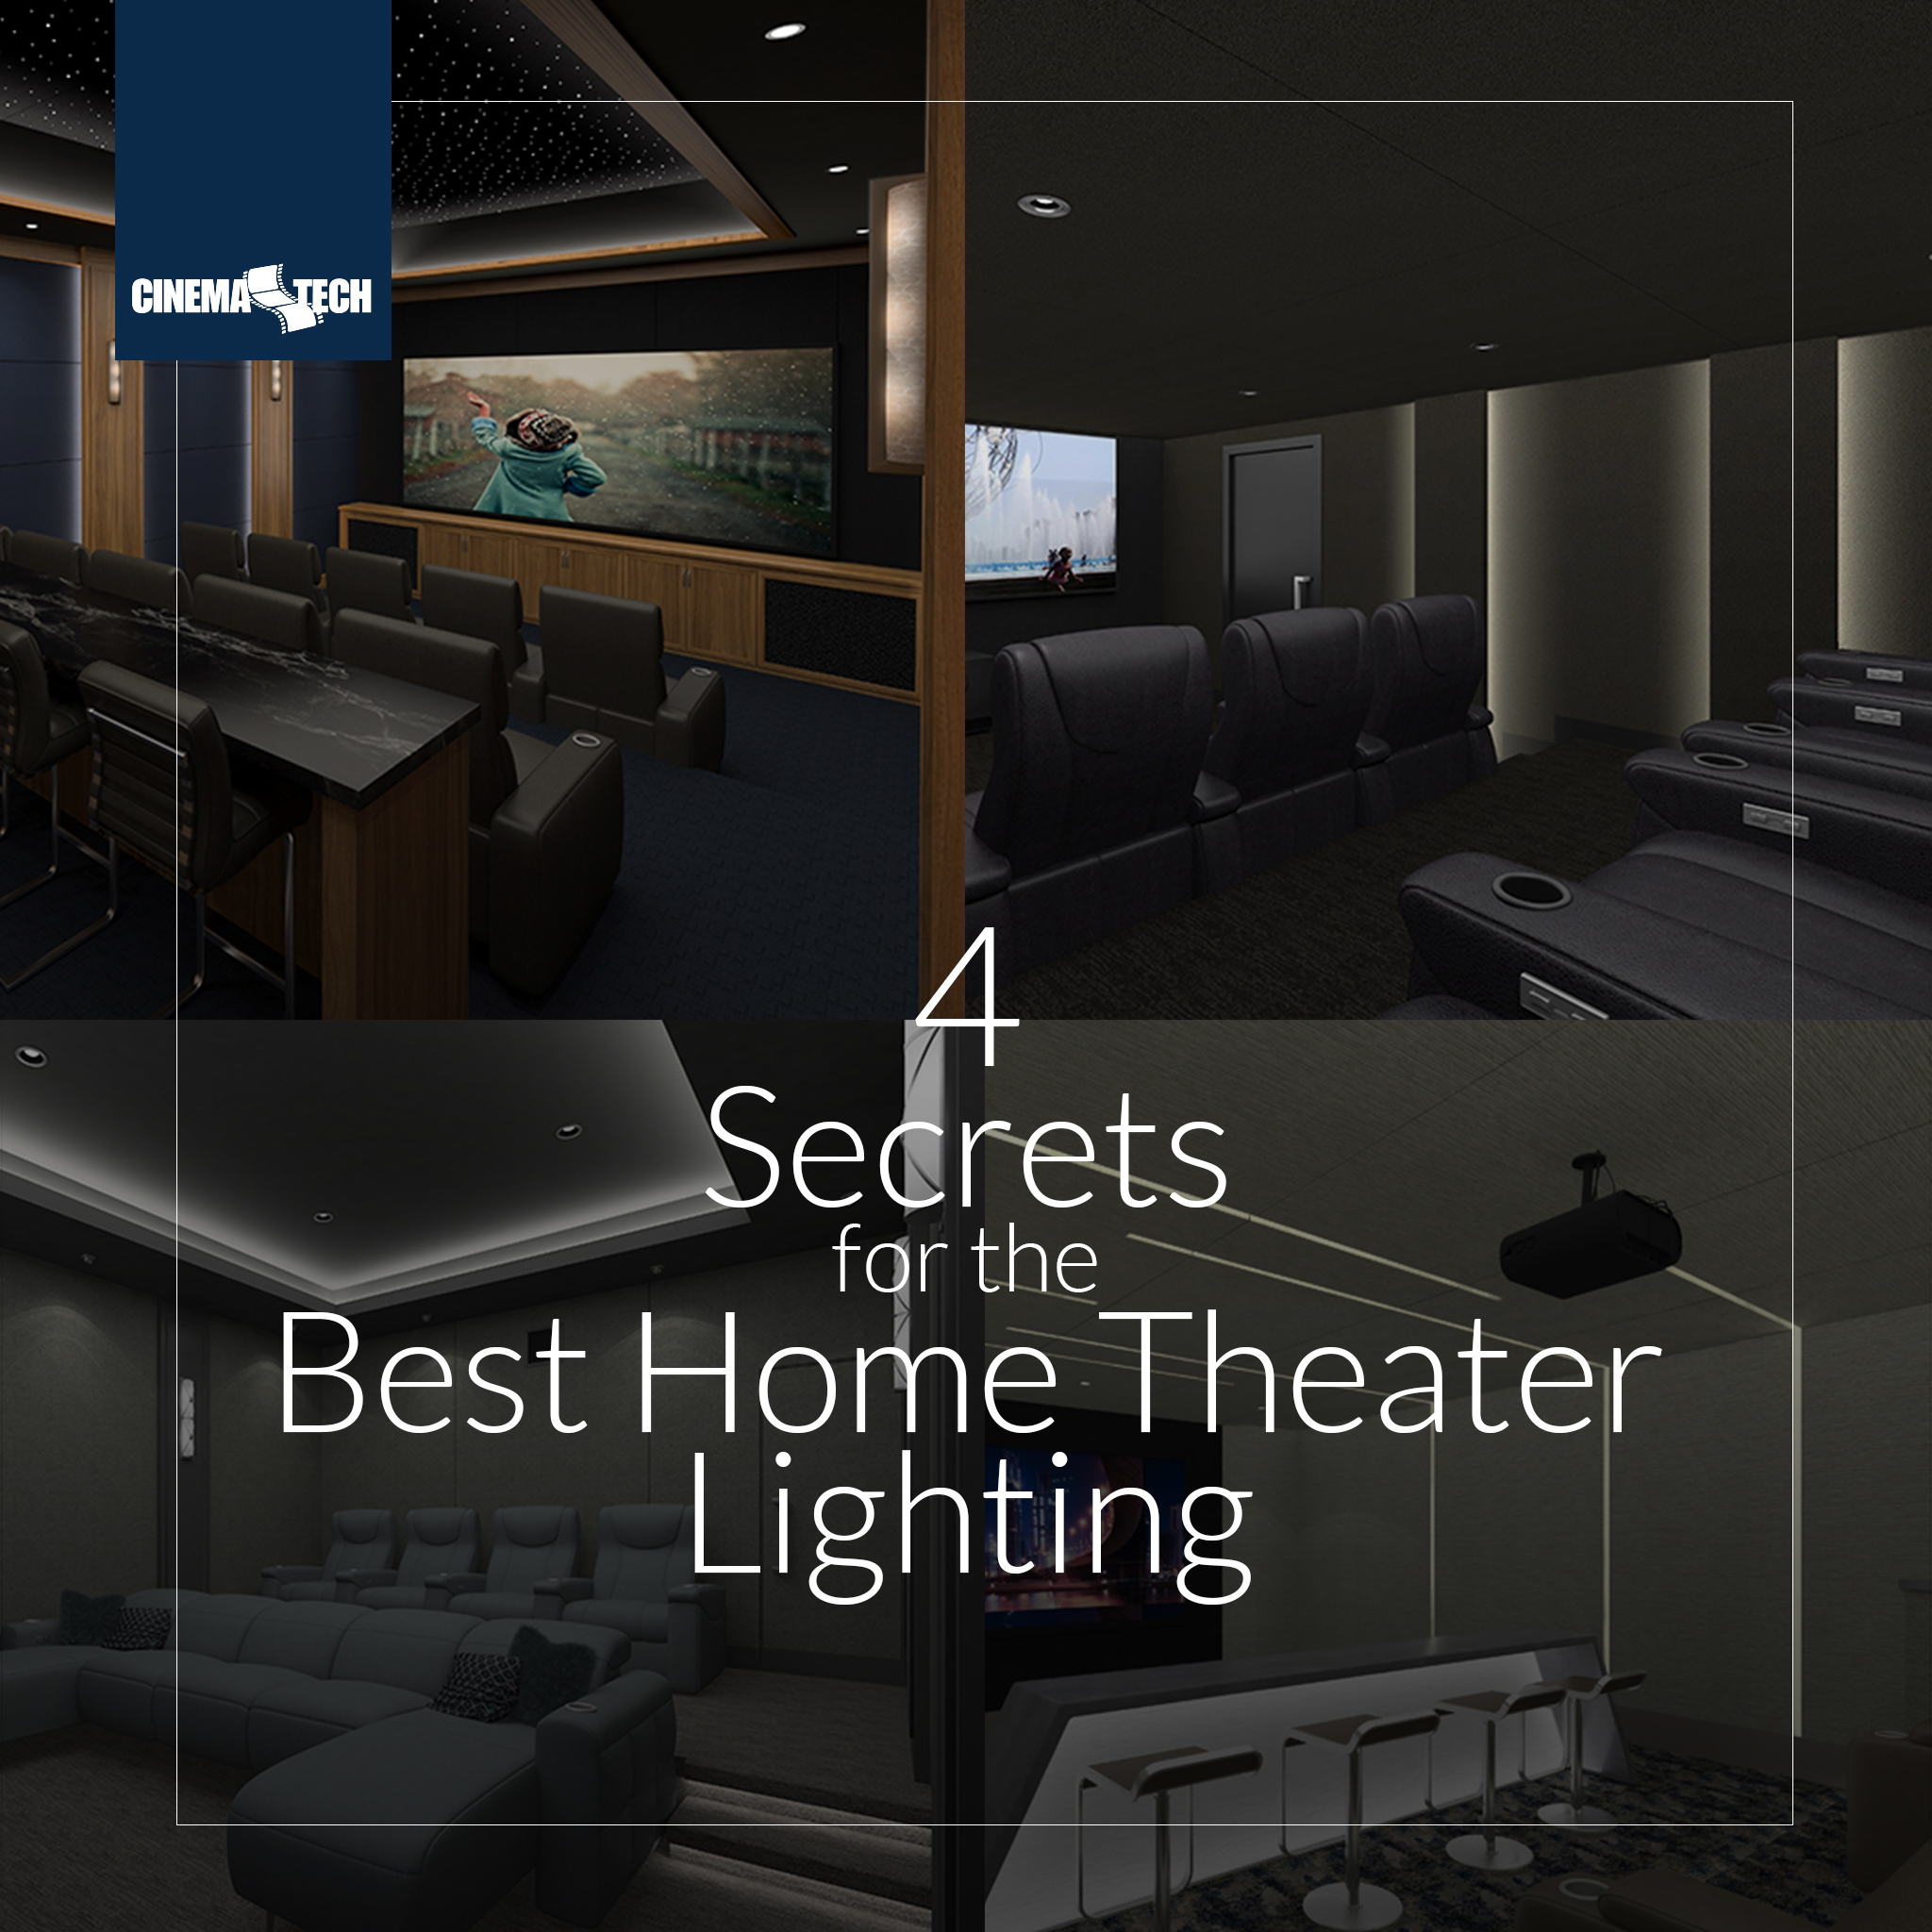 Small Home Theater Lighting : Our selection of home theater lighting ...